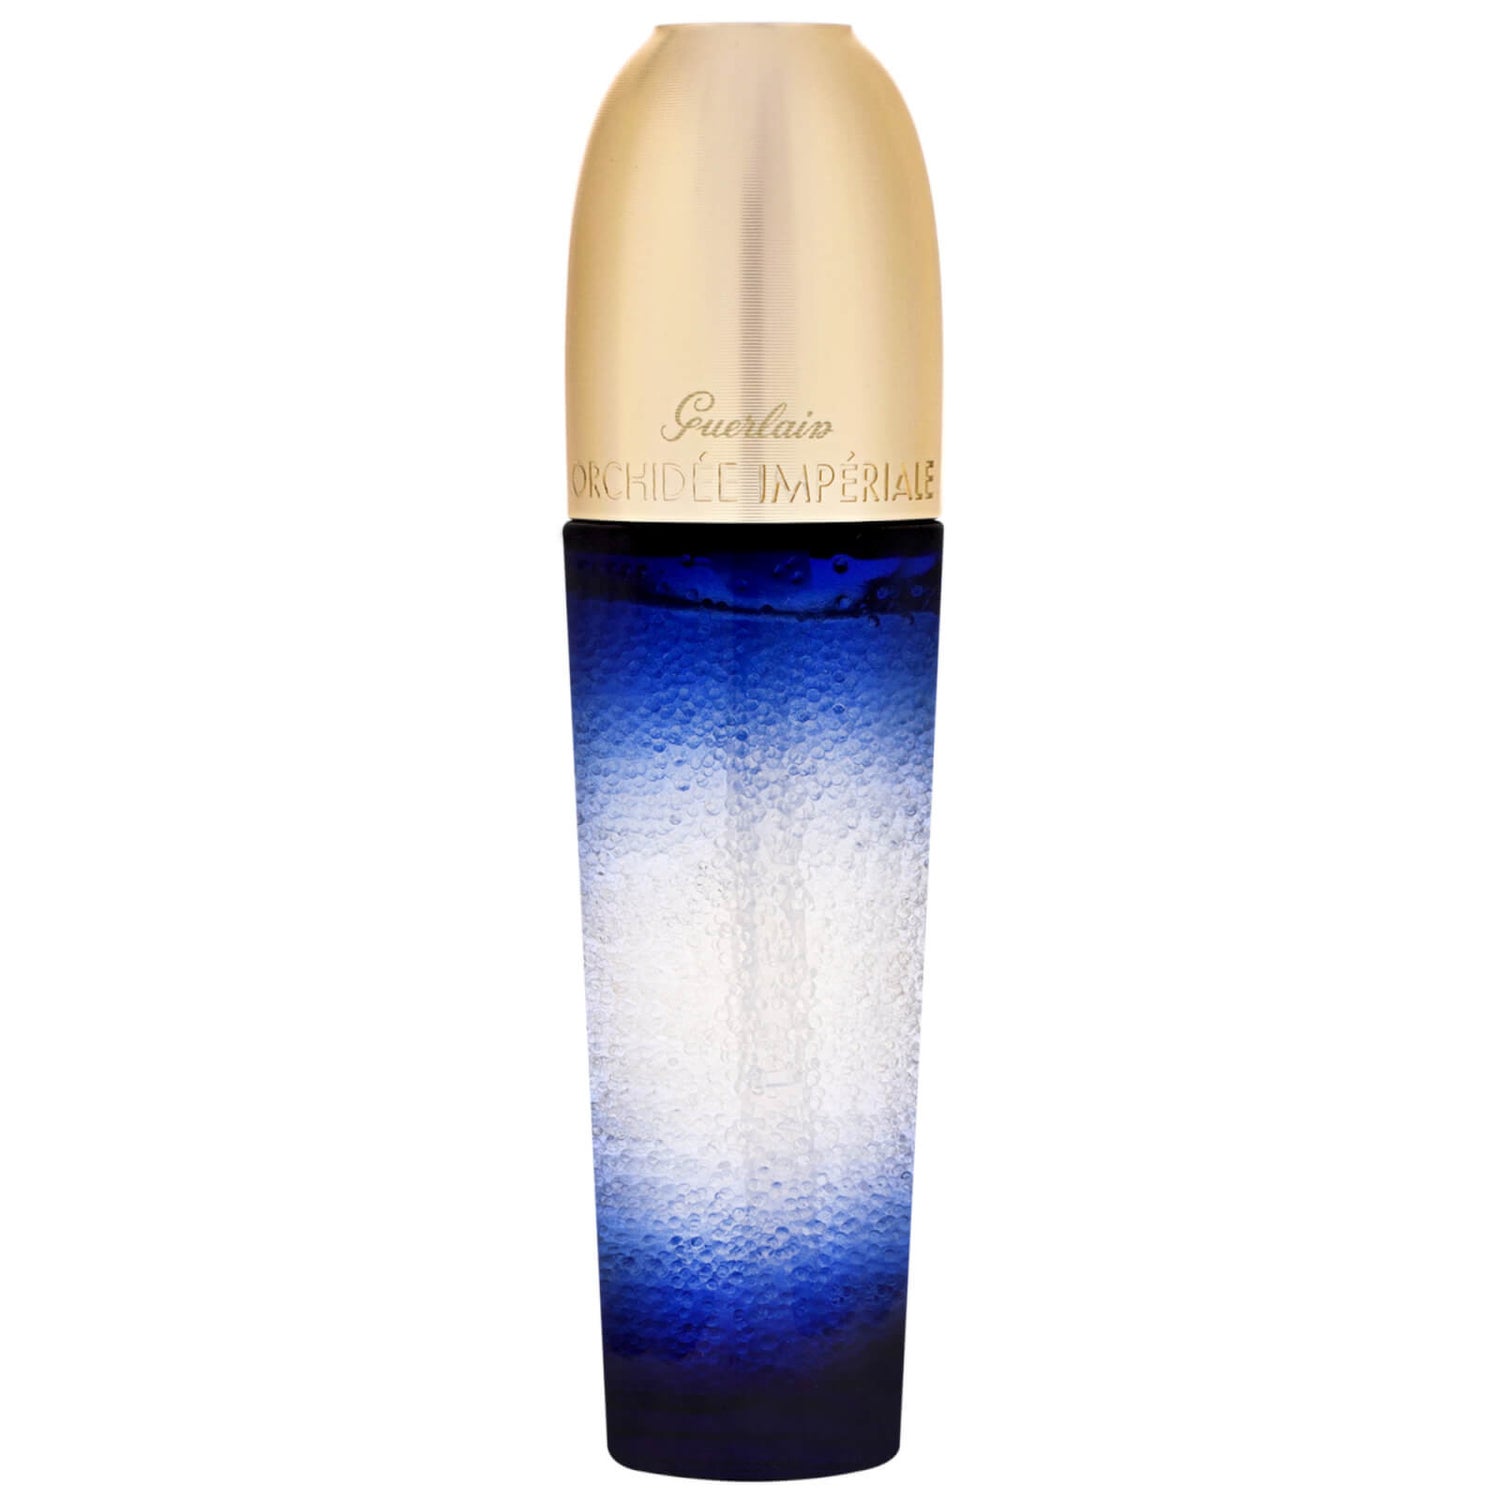 GUERLAIN Orchidee Imperiale Micro-Lift Concentrate Serum